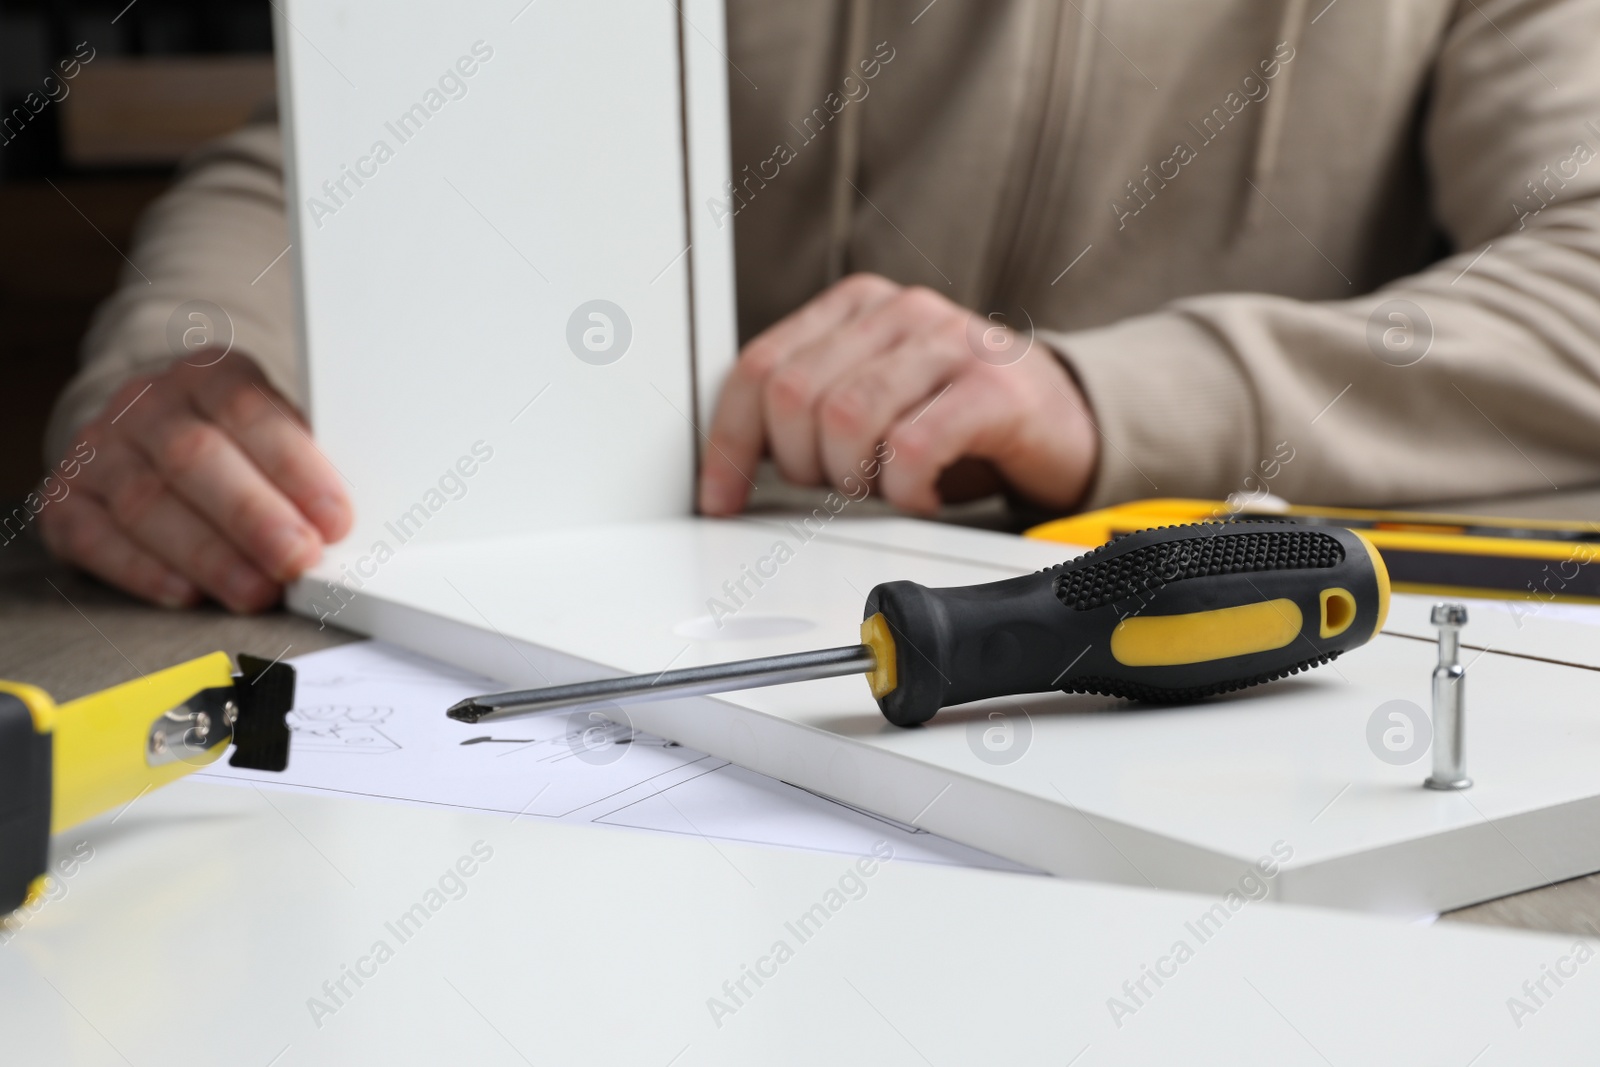 Photo of Man assembling wooden furniture at table, focus on screwdriver